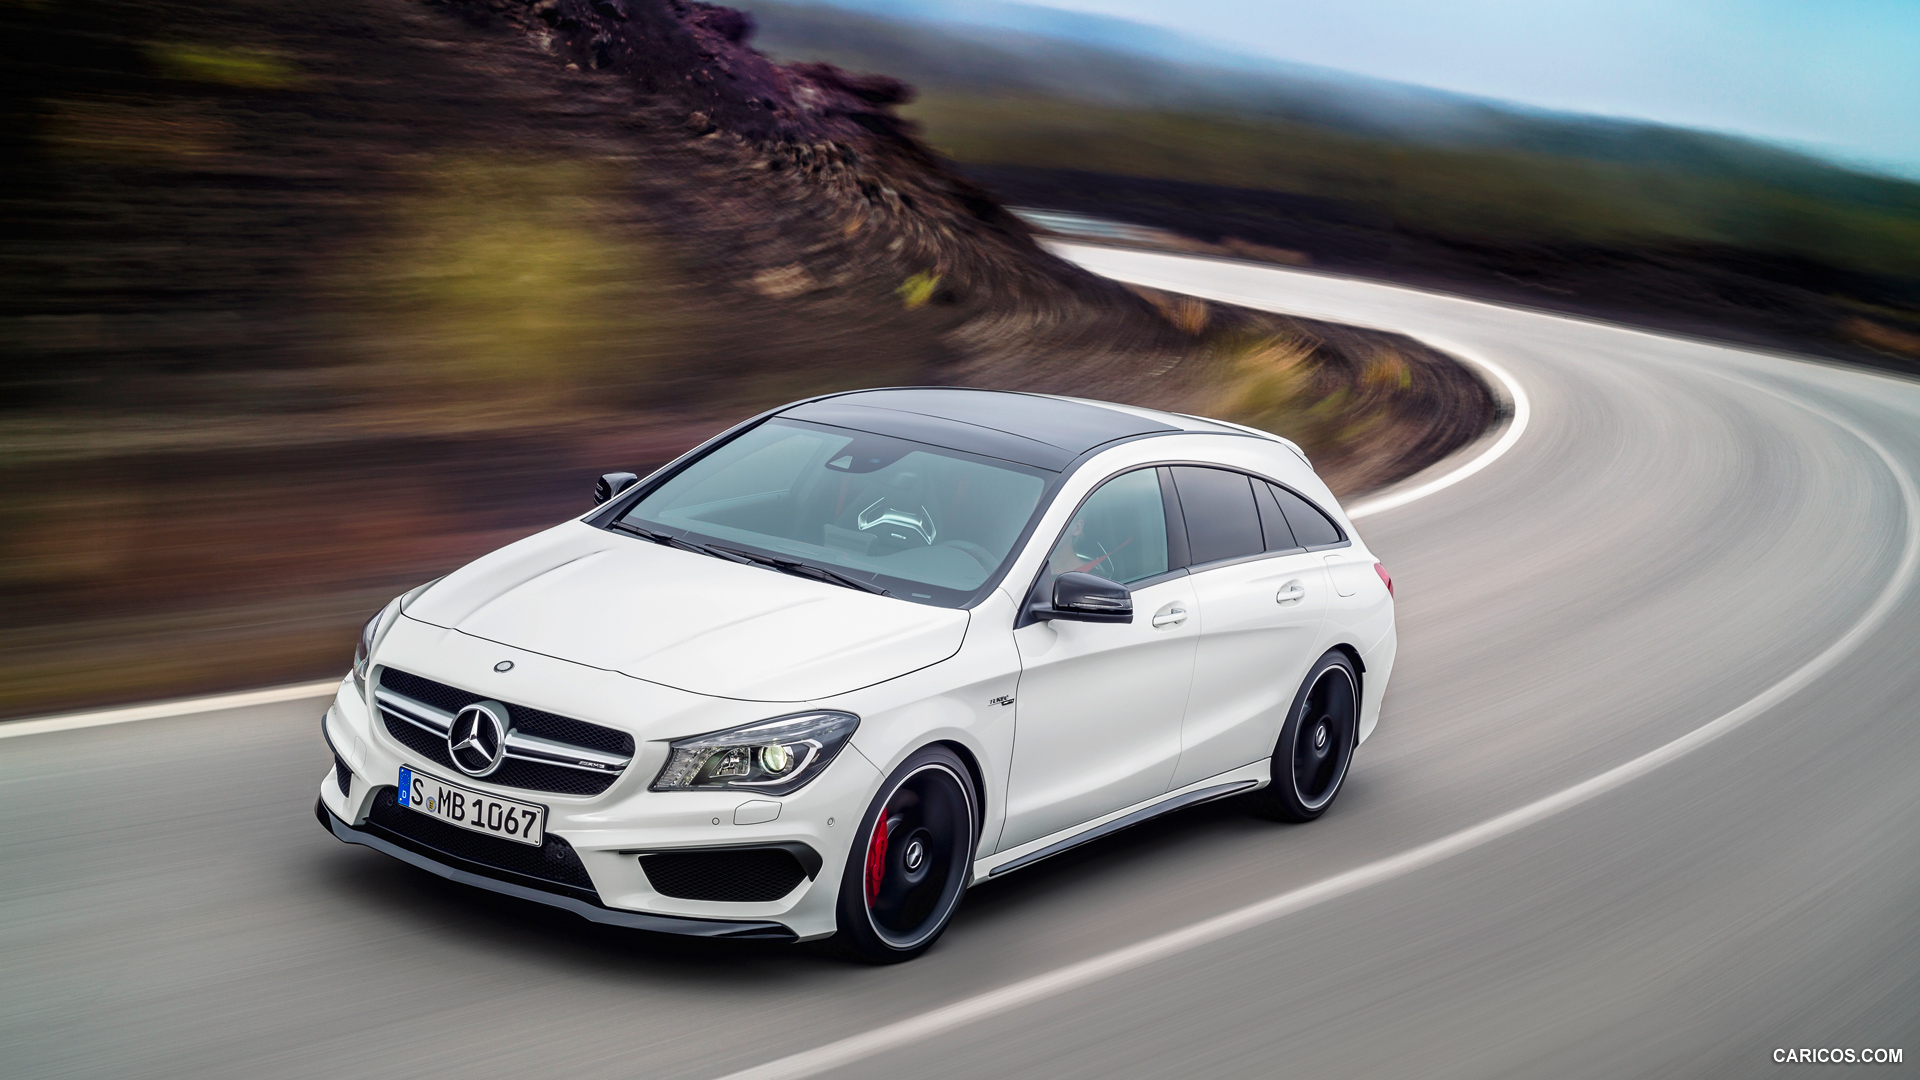 2015 Mercedes-Benz CLA 45 AMG Shooting Brake (Calcite White) - Front, #27 of 70